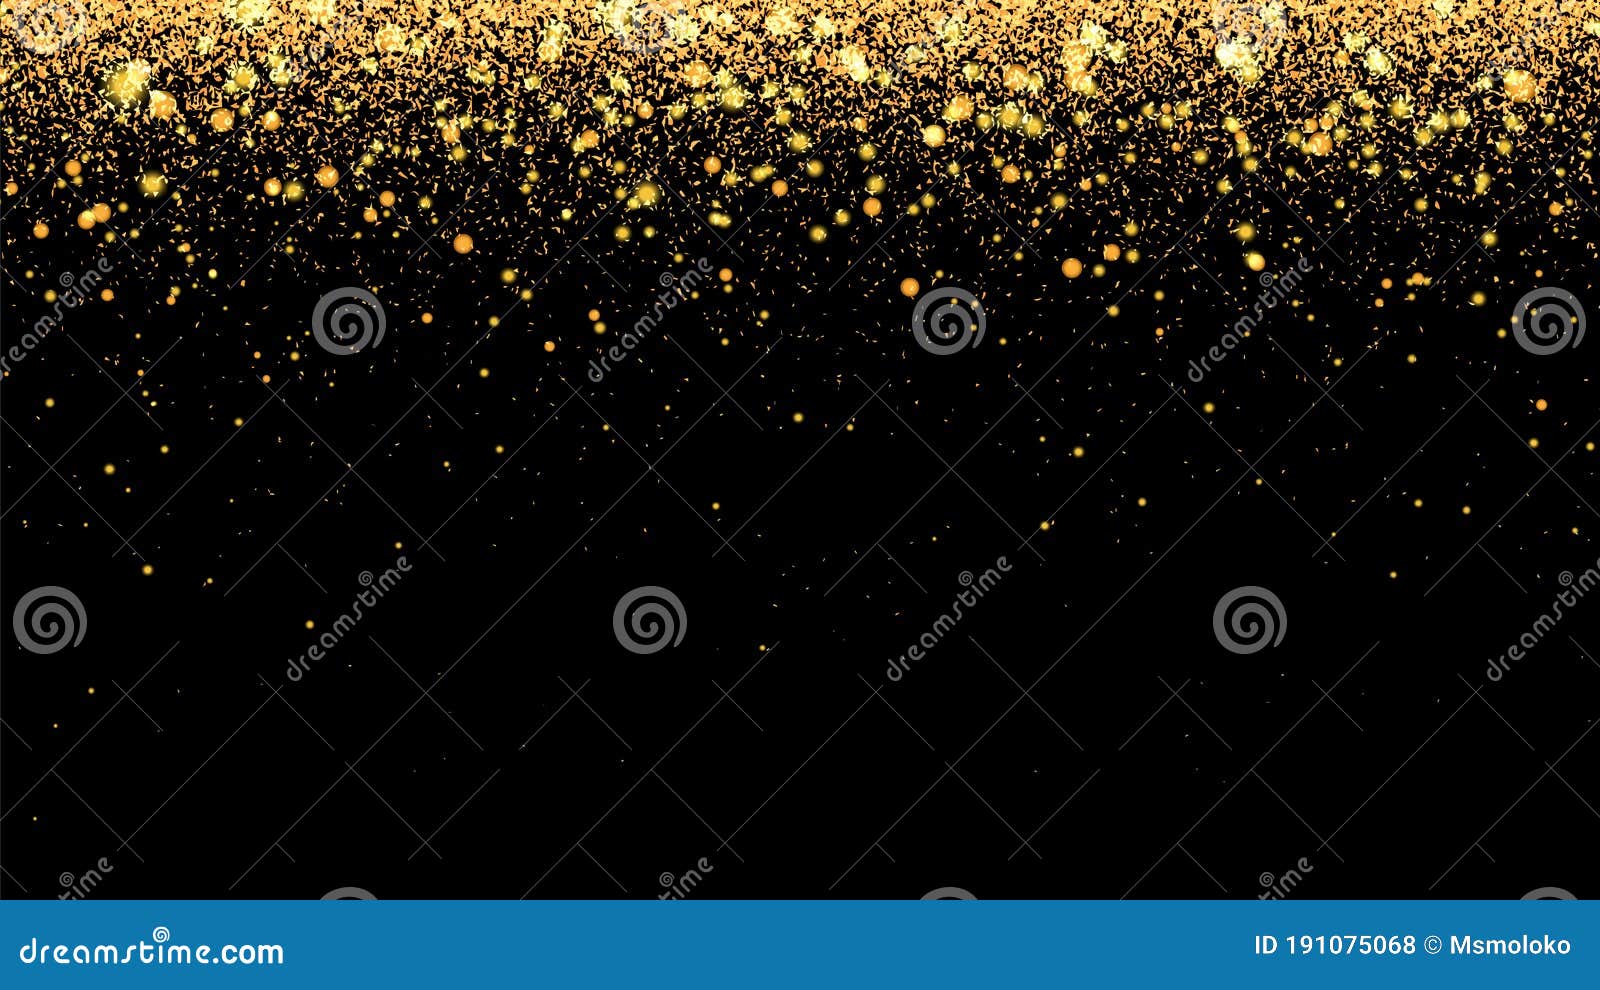 Festive Vector Background With Gold Glitter And Confetti For Christmas